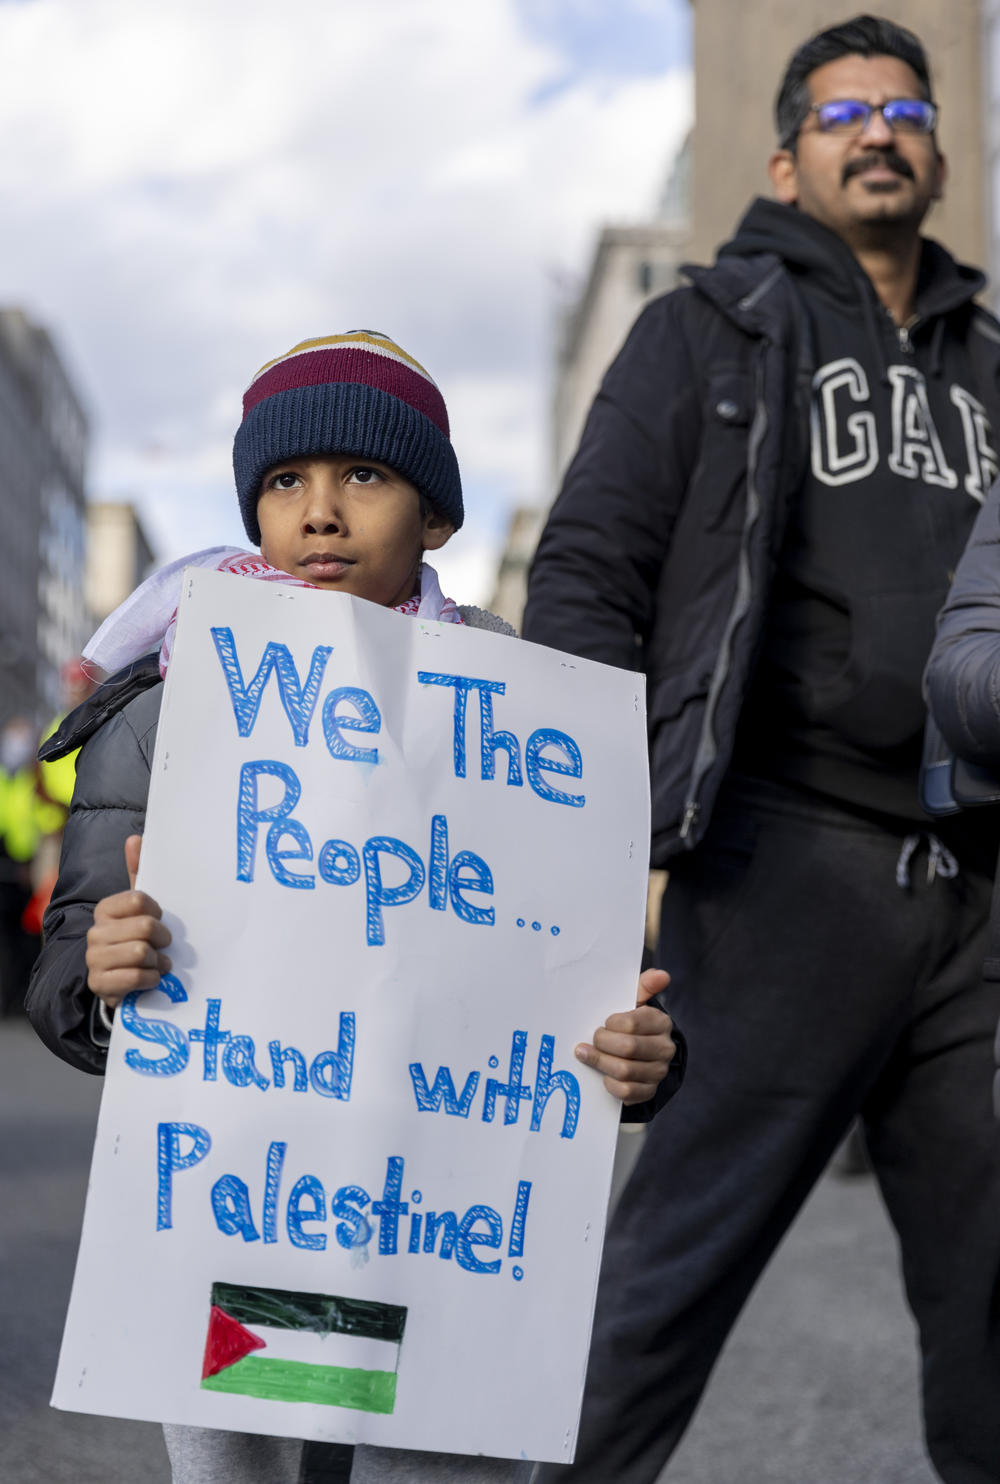 A child attending the rally held his sign.